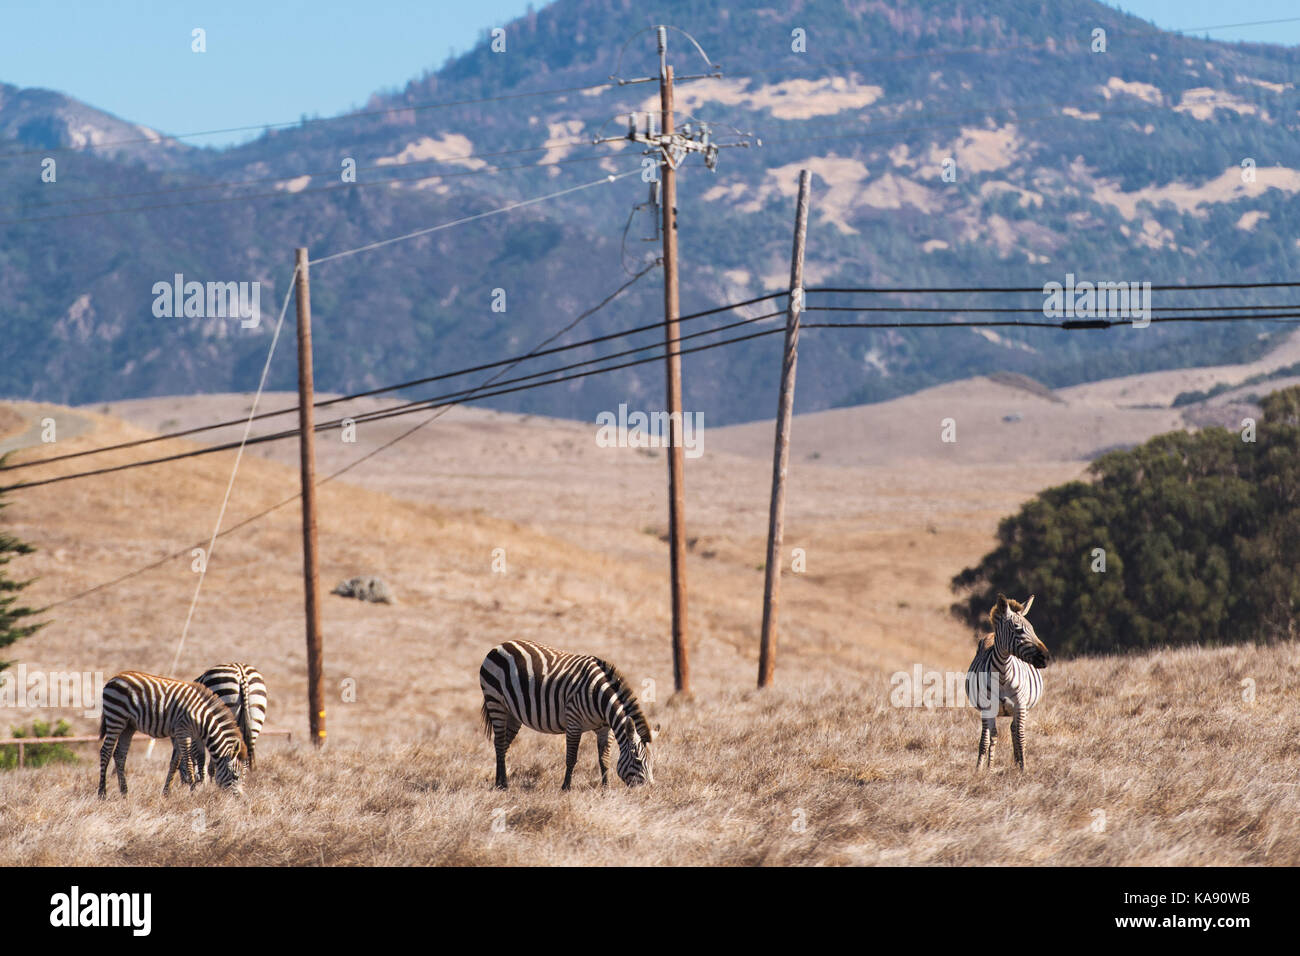 A herd of zebras roaming the grounds of Hearst Castle in San Simeon on the Pacific Coast Highway, California Stock Photo